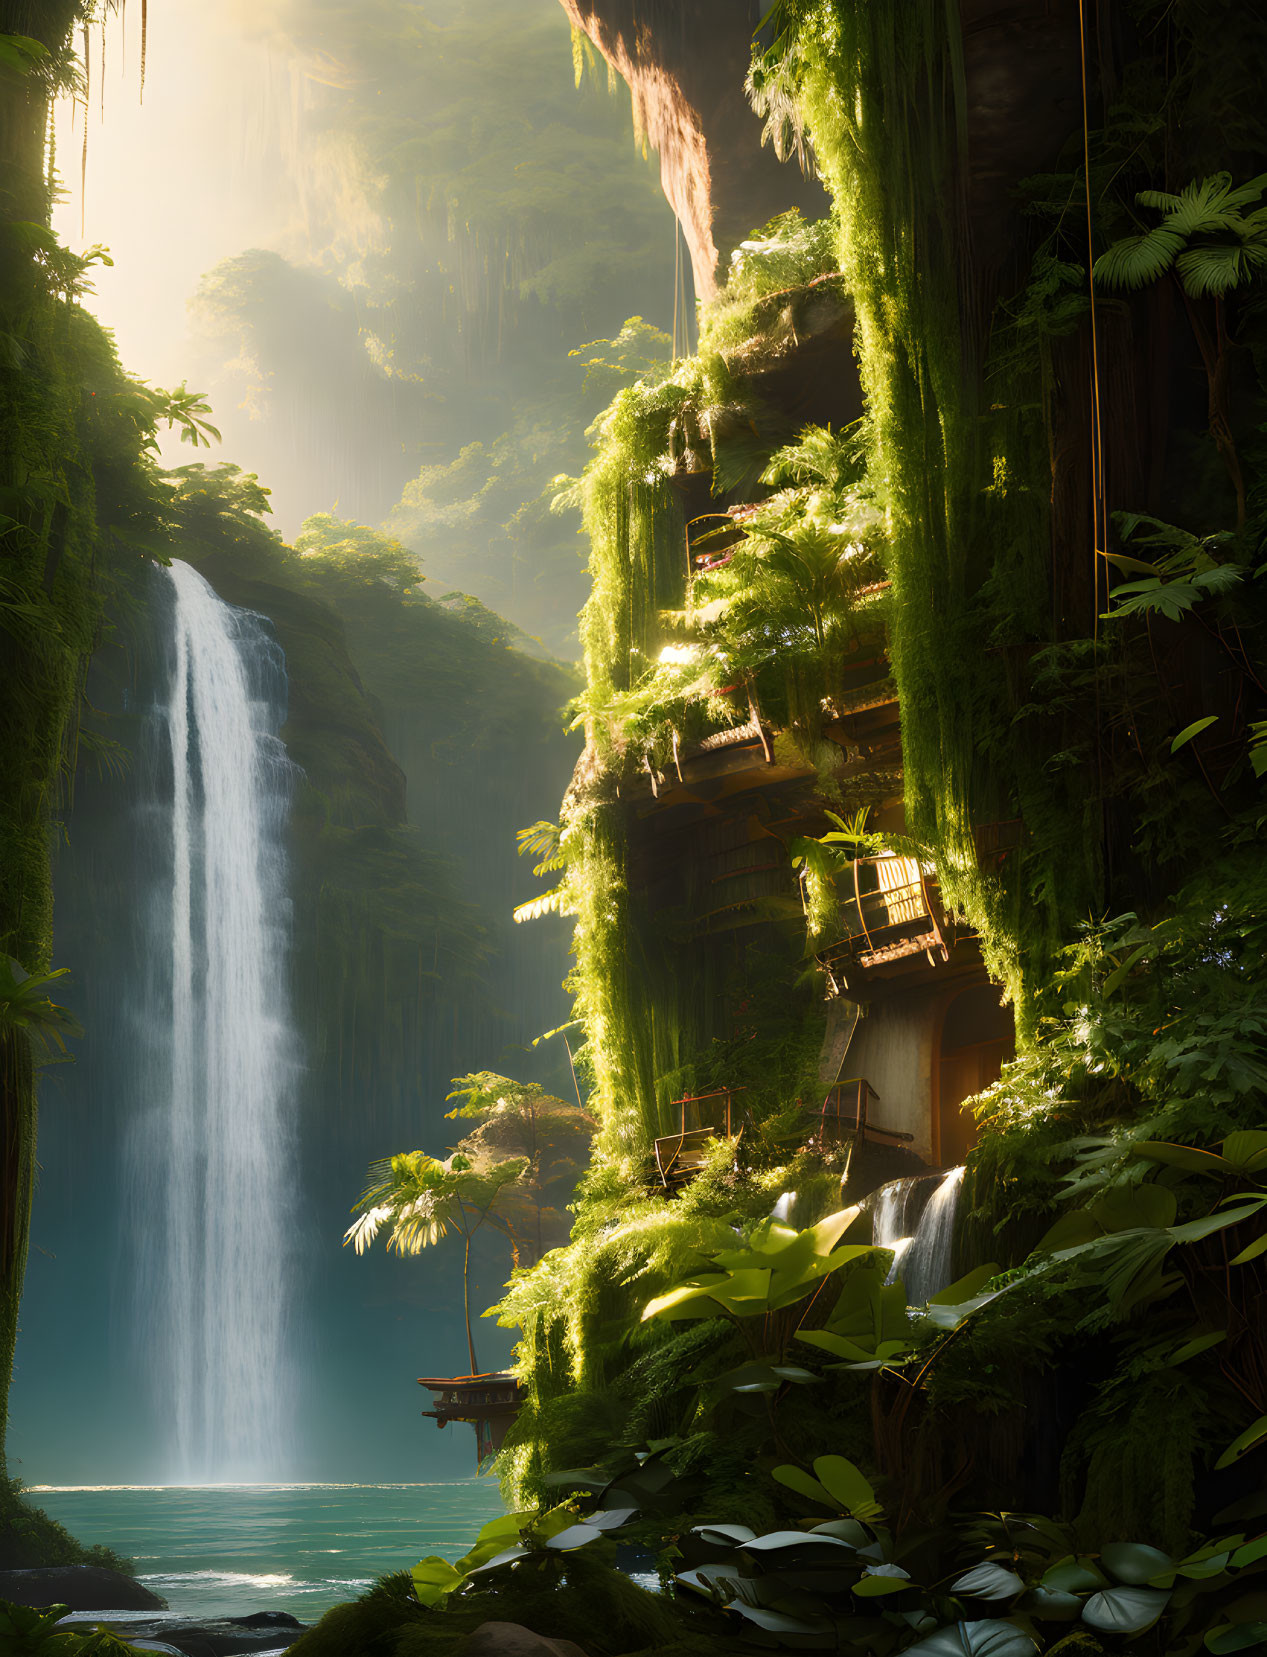 Tranquil waterfall beside moss-covered cliffs in soft sunlight